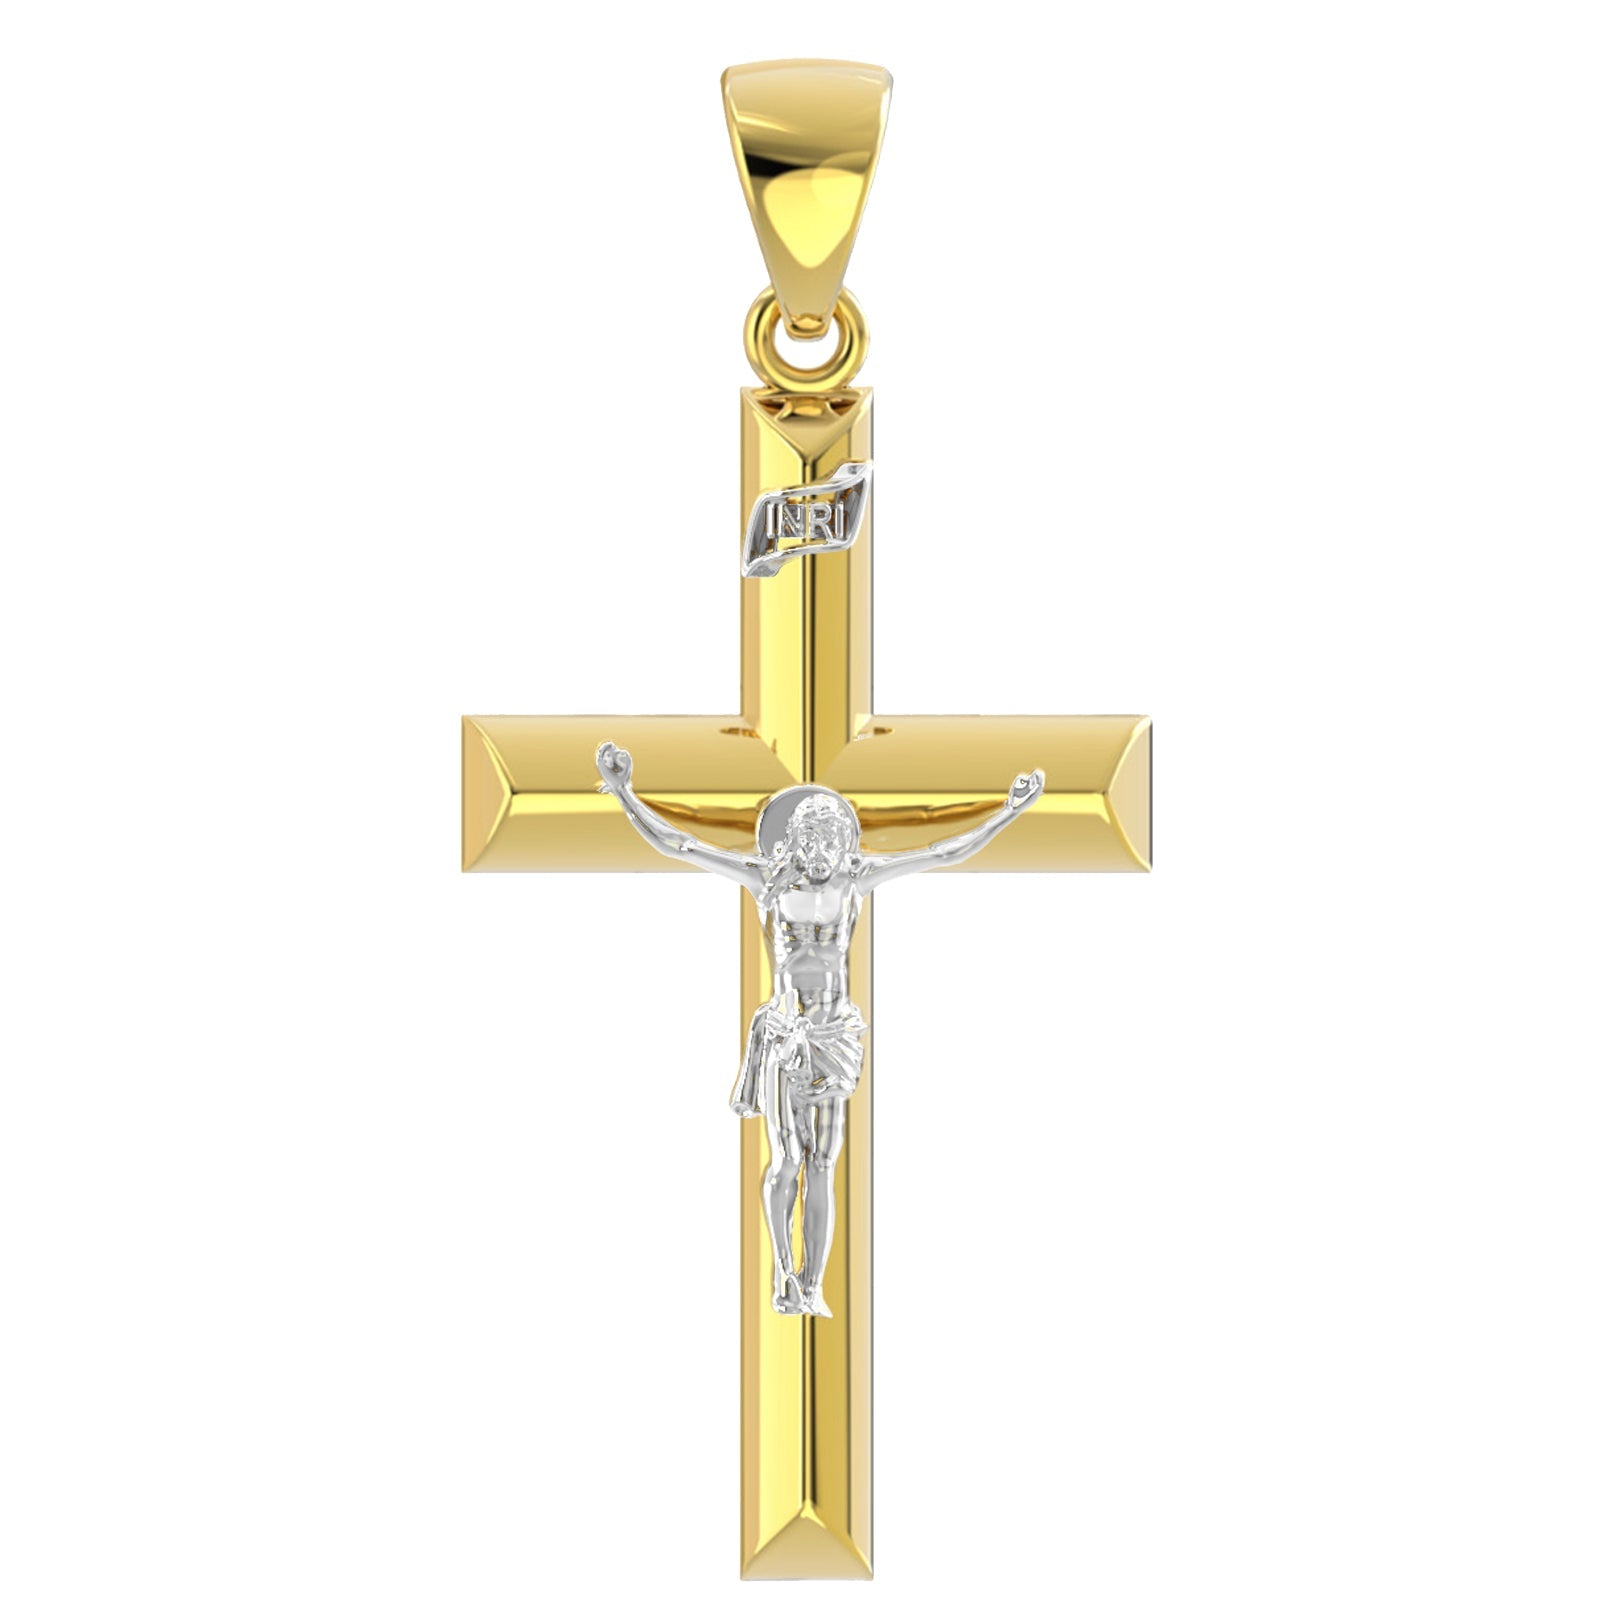 Ladies 14k Yellow & White Gold Angled Cross Crucifix Pendant Necklace, 32mm